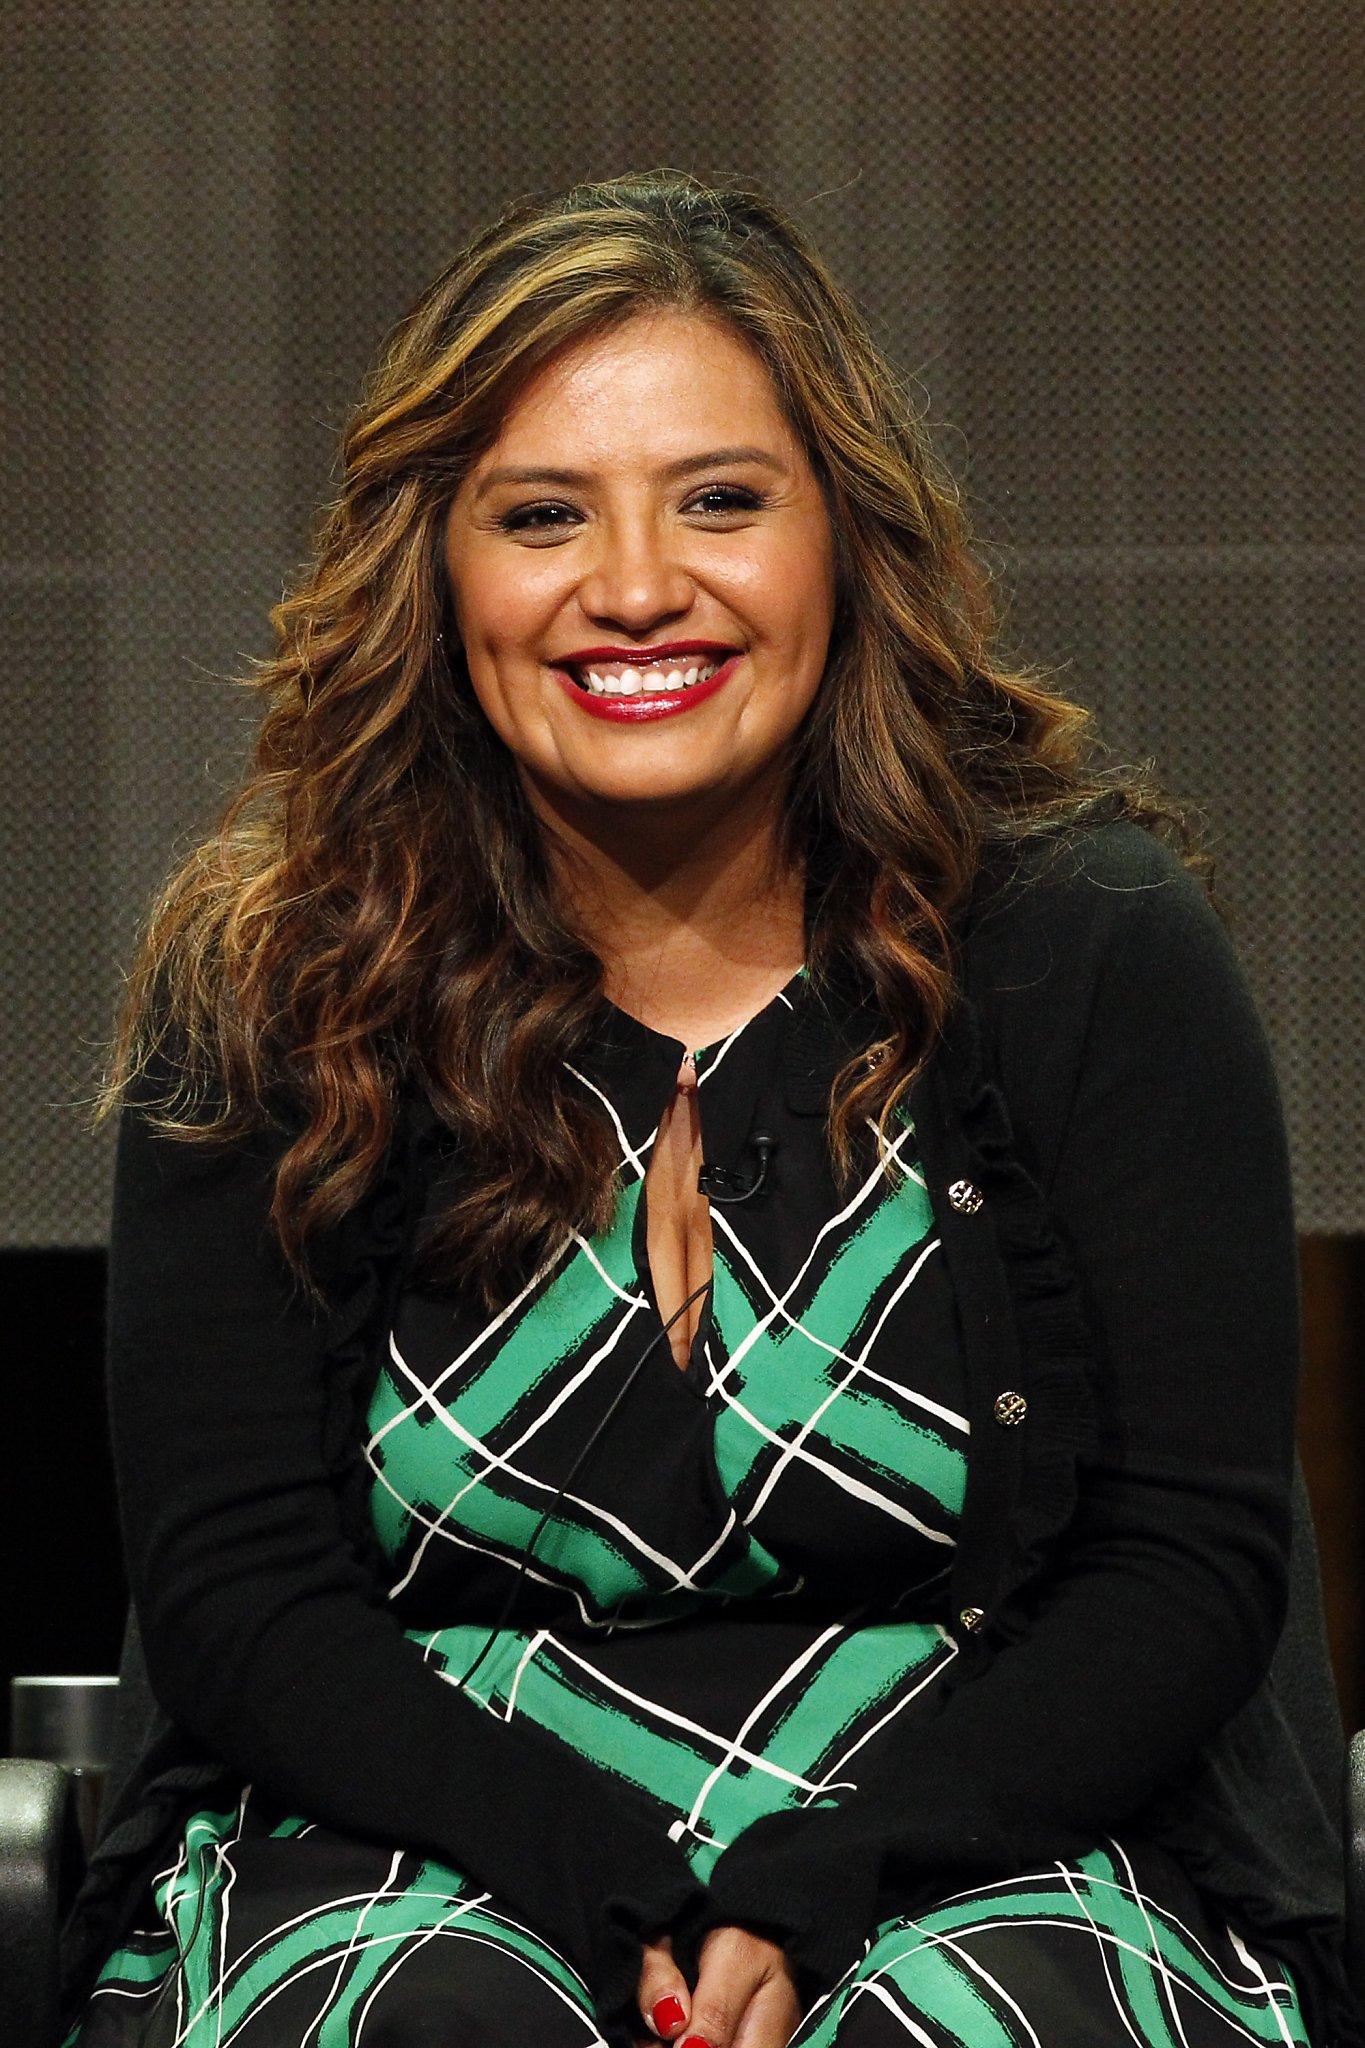 'One of my favorite cities' San Antonio included in comedian Cristela